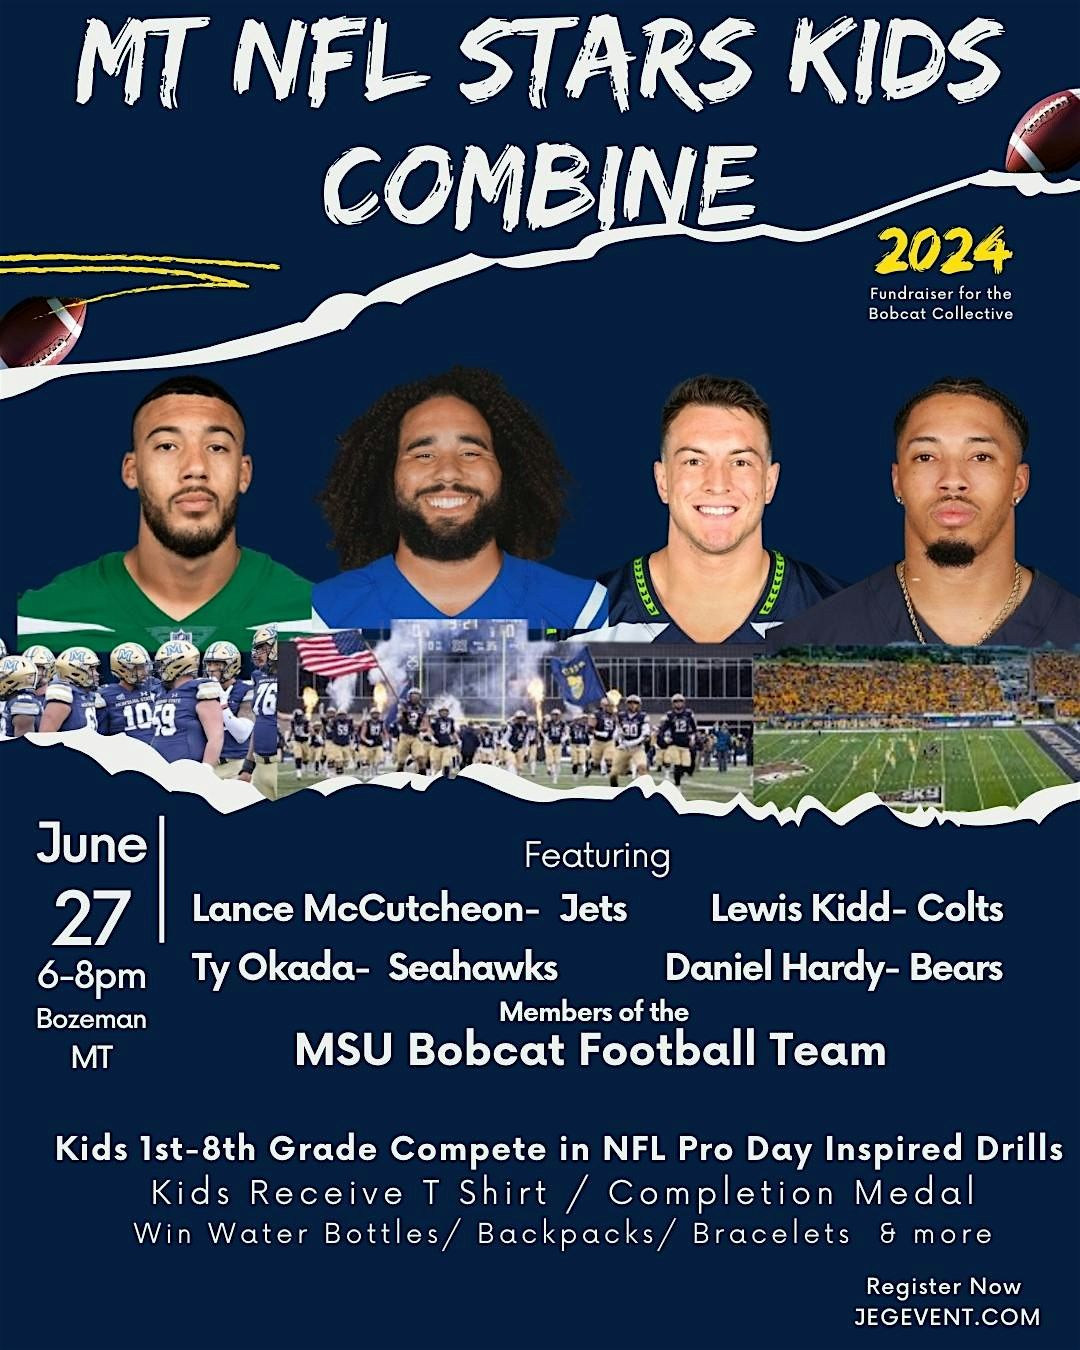 MT NFL Stars Kids Combine Bozeman-powered by The  Bobcat Collective